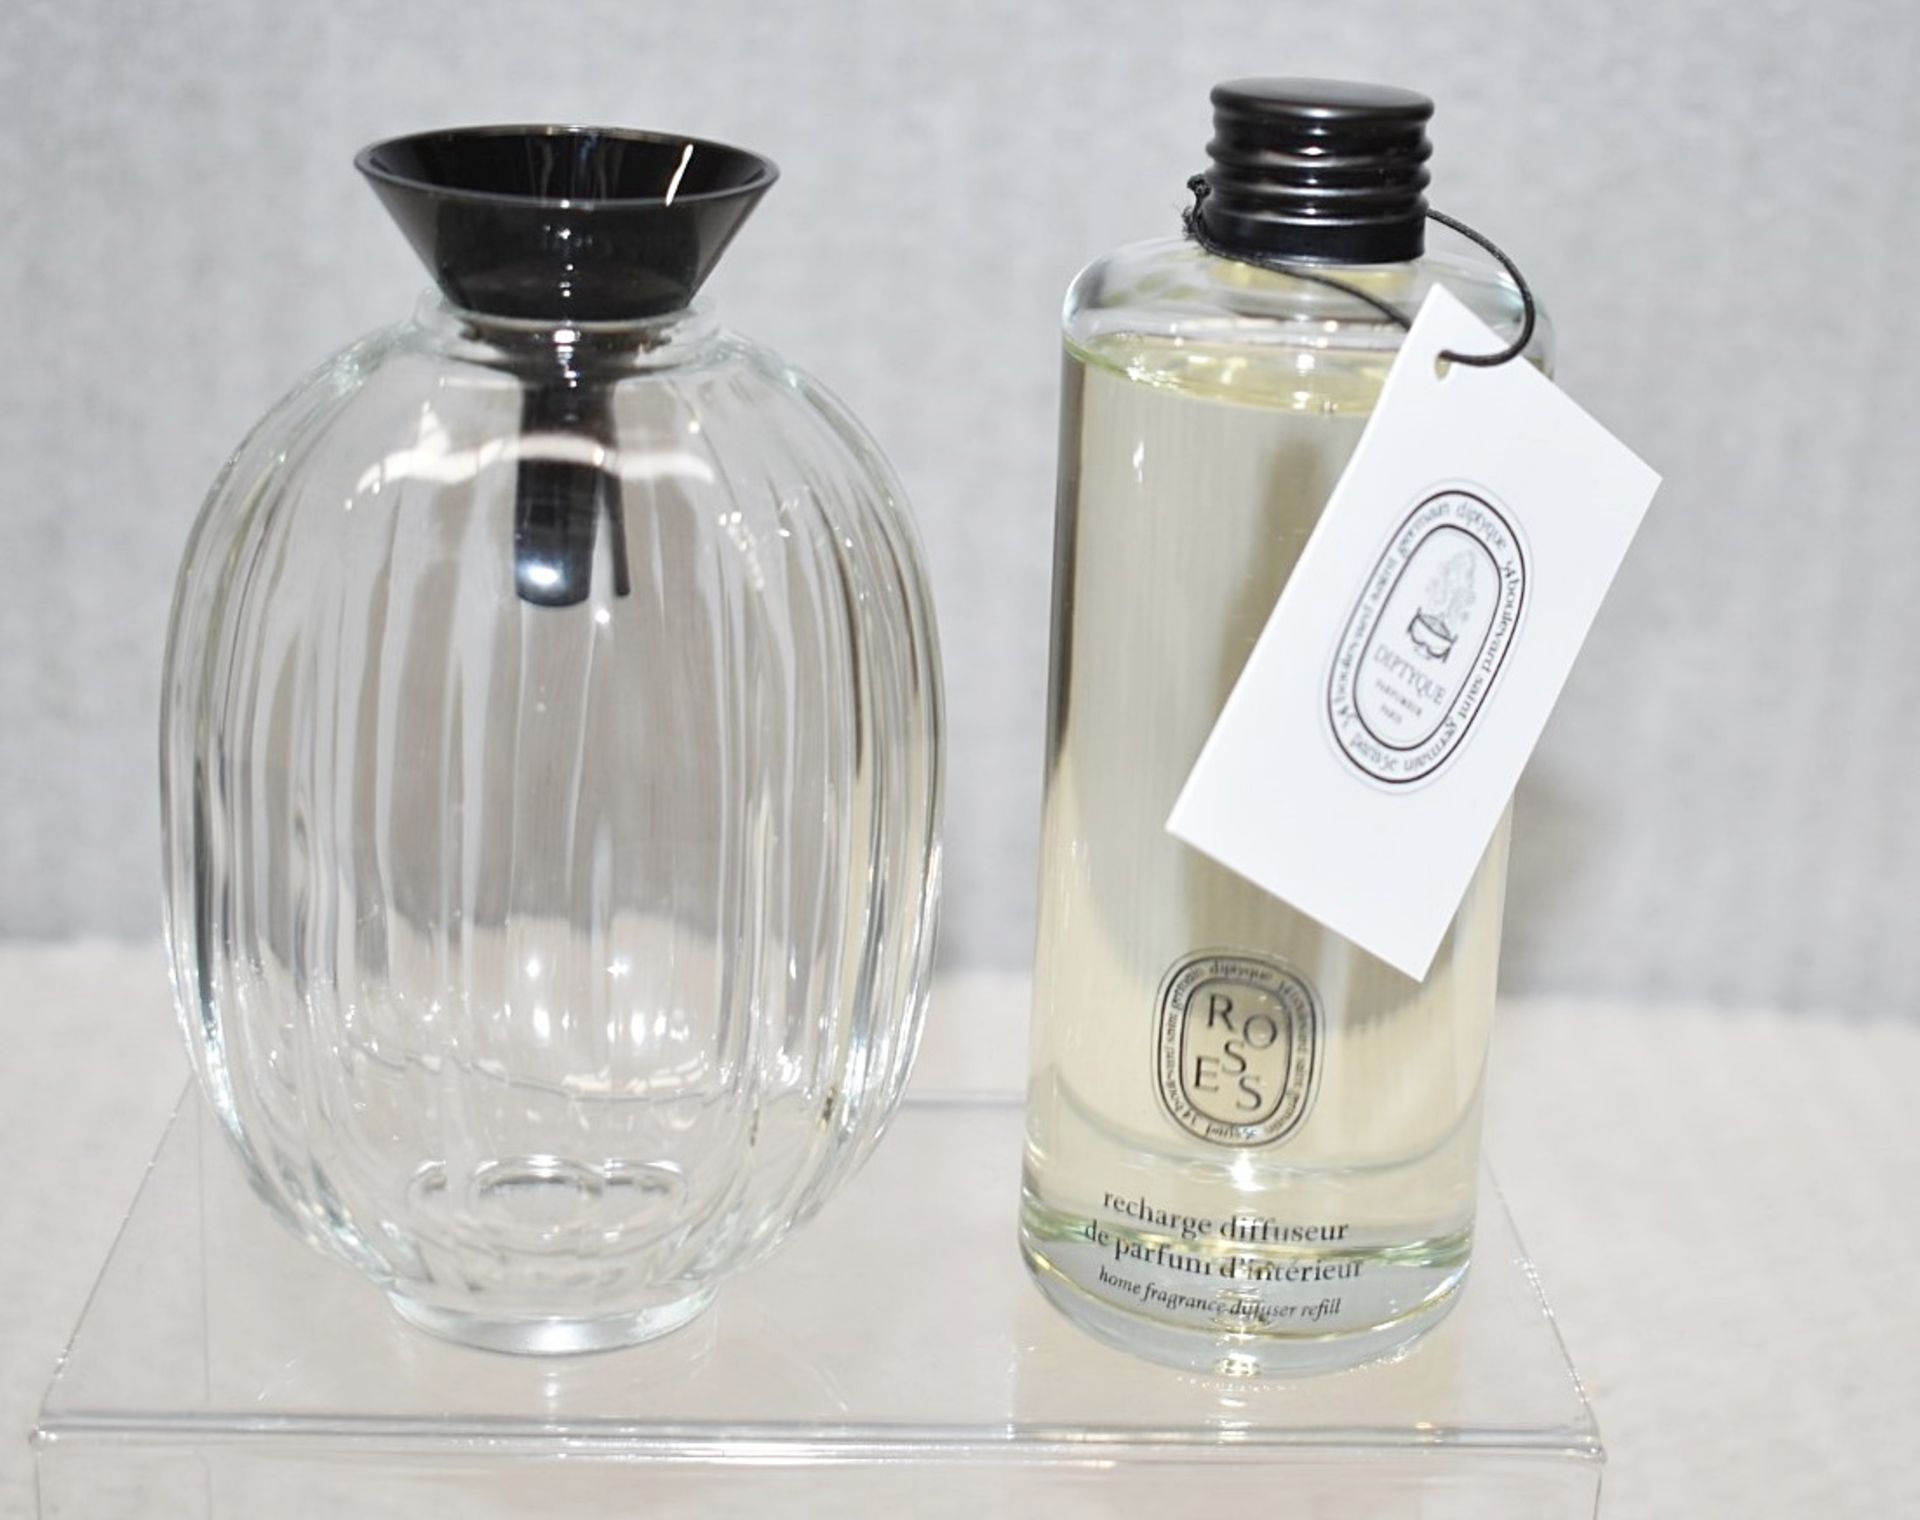 1 x DIPTYQUE 'Roses' Luxury Diffuser with Frangrance and Reeds (200ml) - Original Price £152.00 - Image 3 of 6